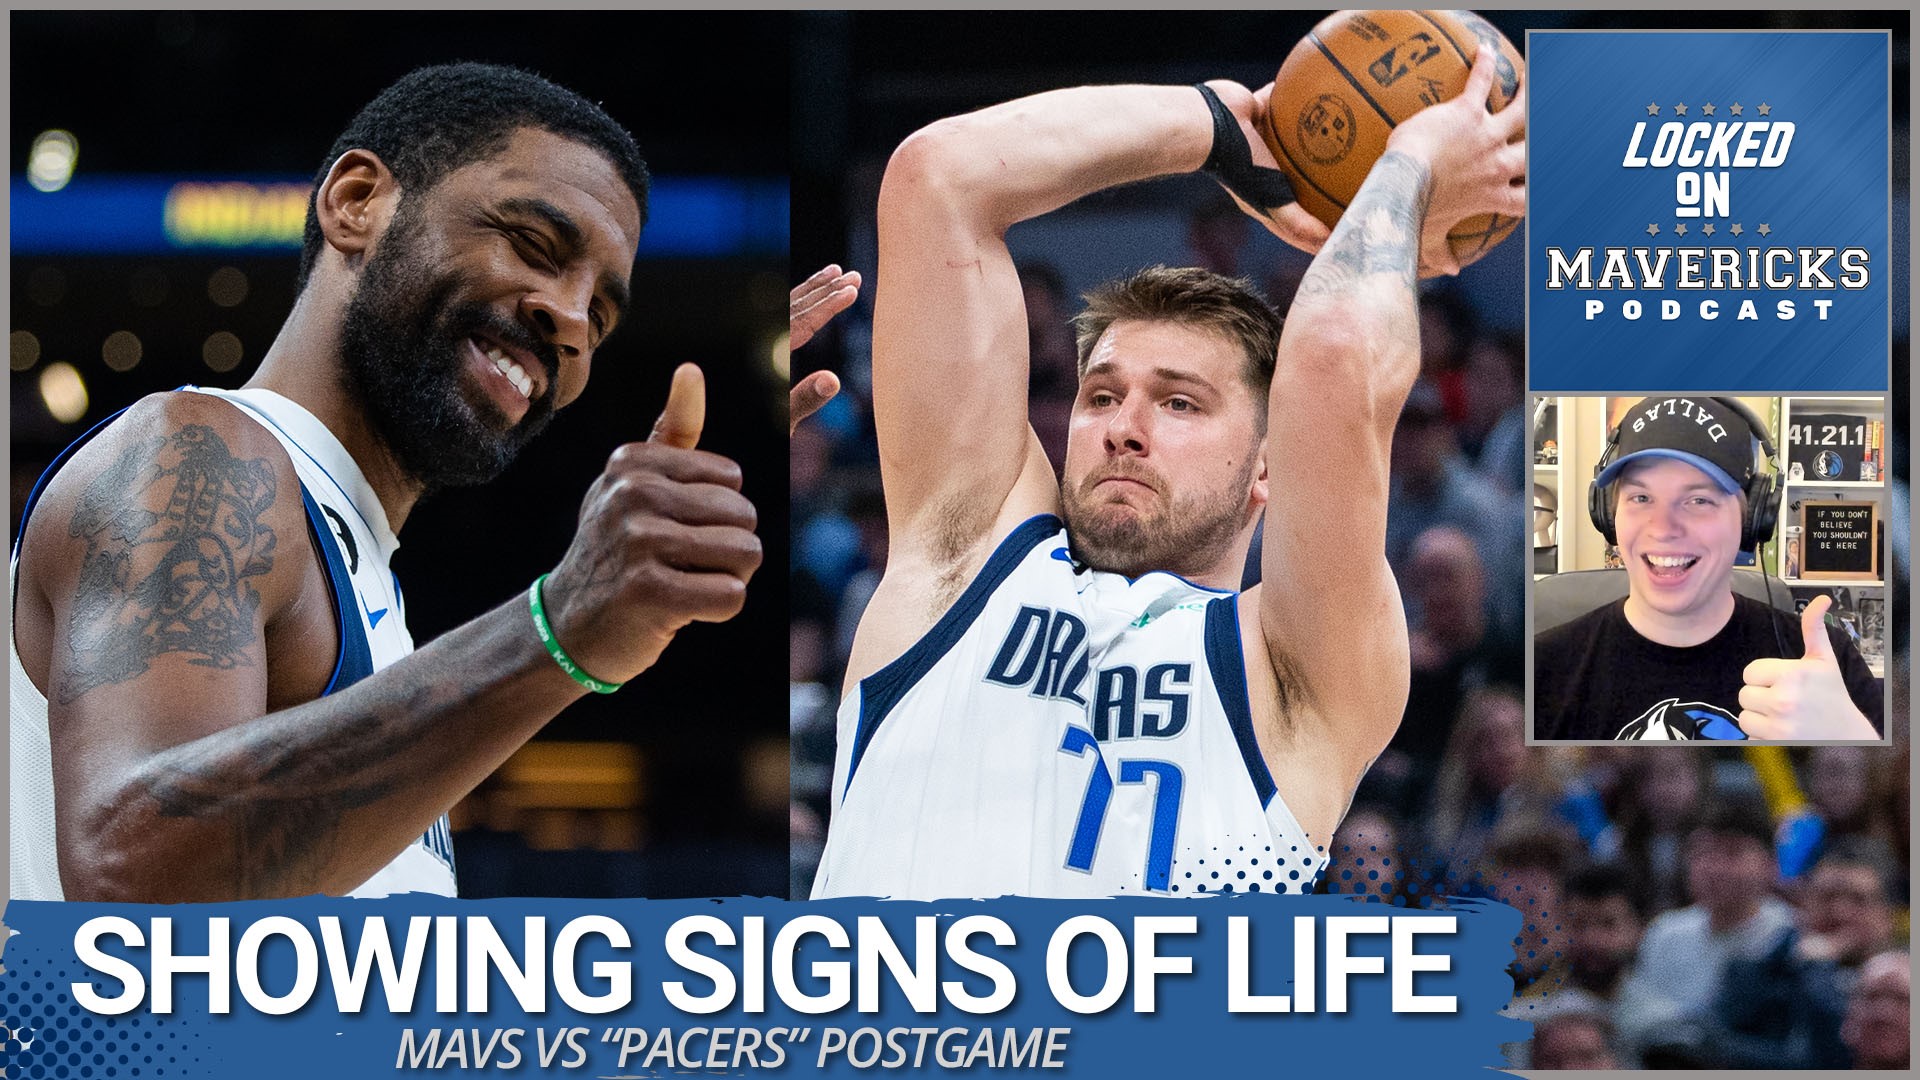 Nick Angstadt breaks down the Dallas Mavericks' win over the Indiana Pacers and how Luka Doncic, Kyrie Irving, and the Mavs set the tone early.